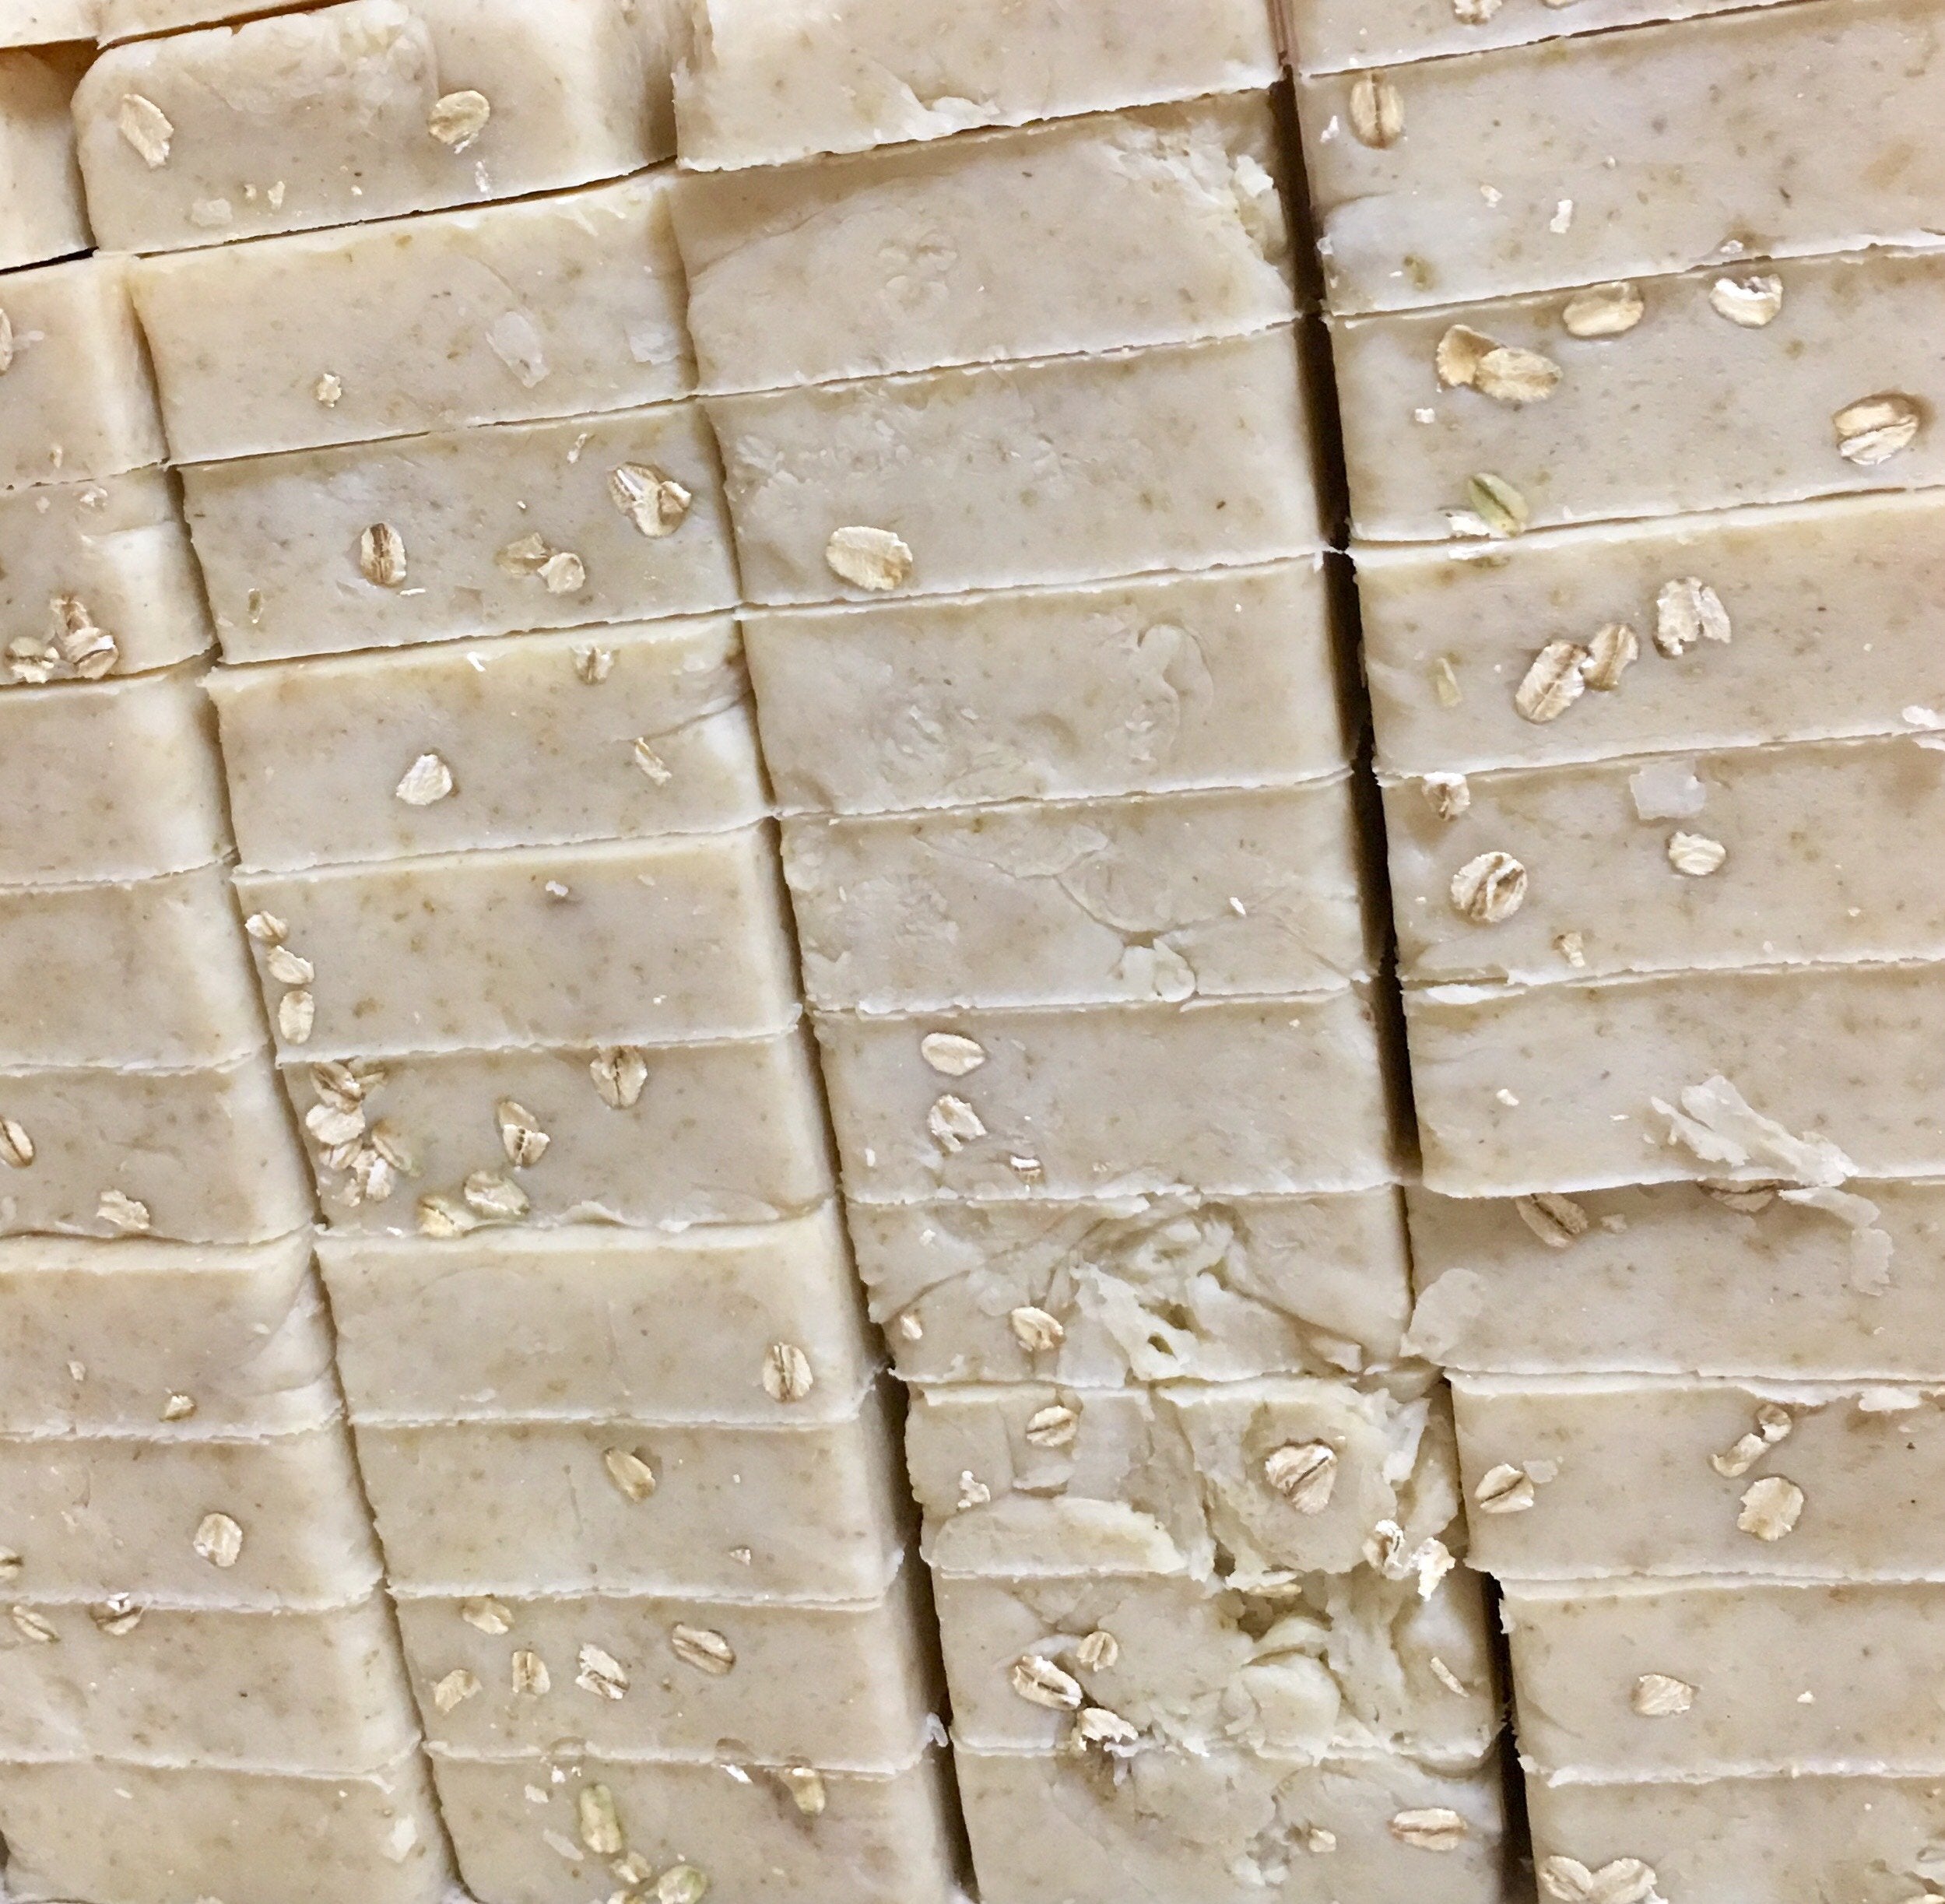 (12) Wholesale Honey & Oatmeal Soap: Suggested Retail Price $7-$9 each